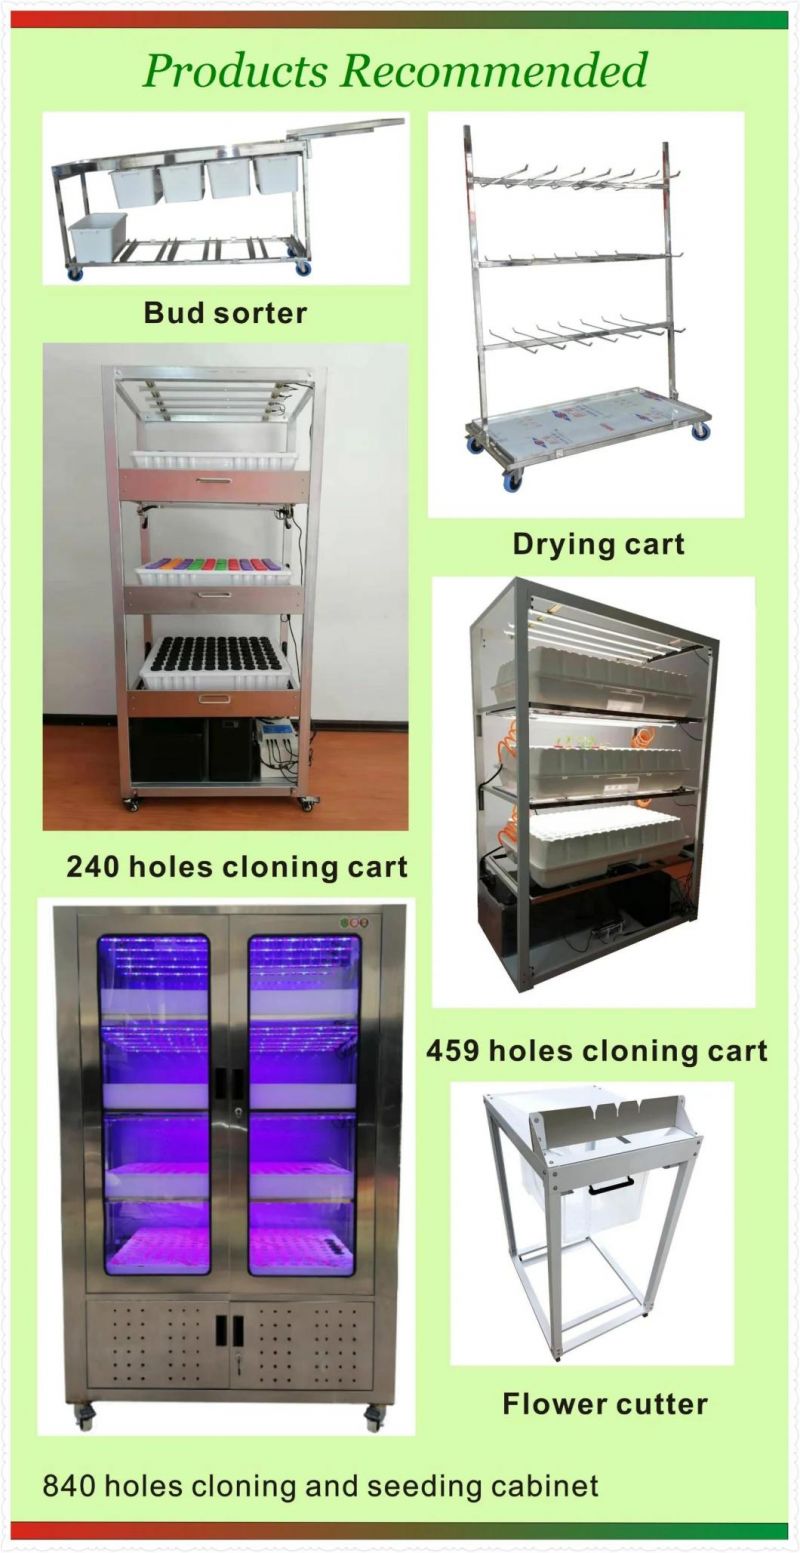 153 Holes Cutting Cloning Cart Tools with Chiller